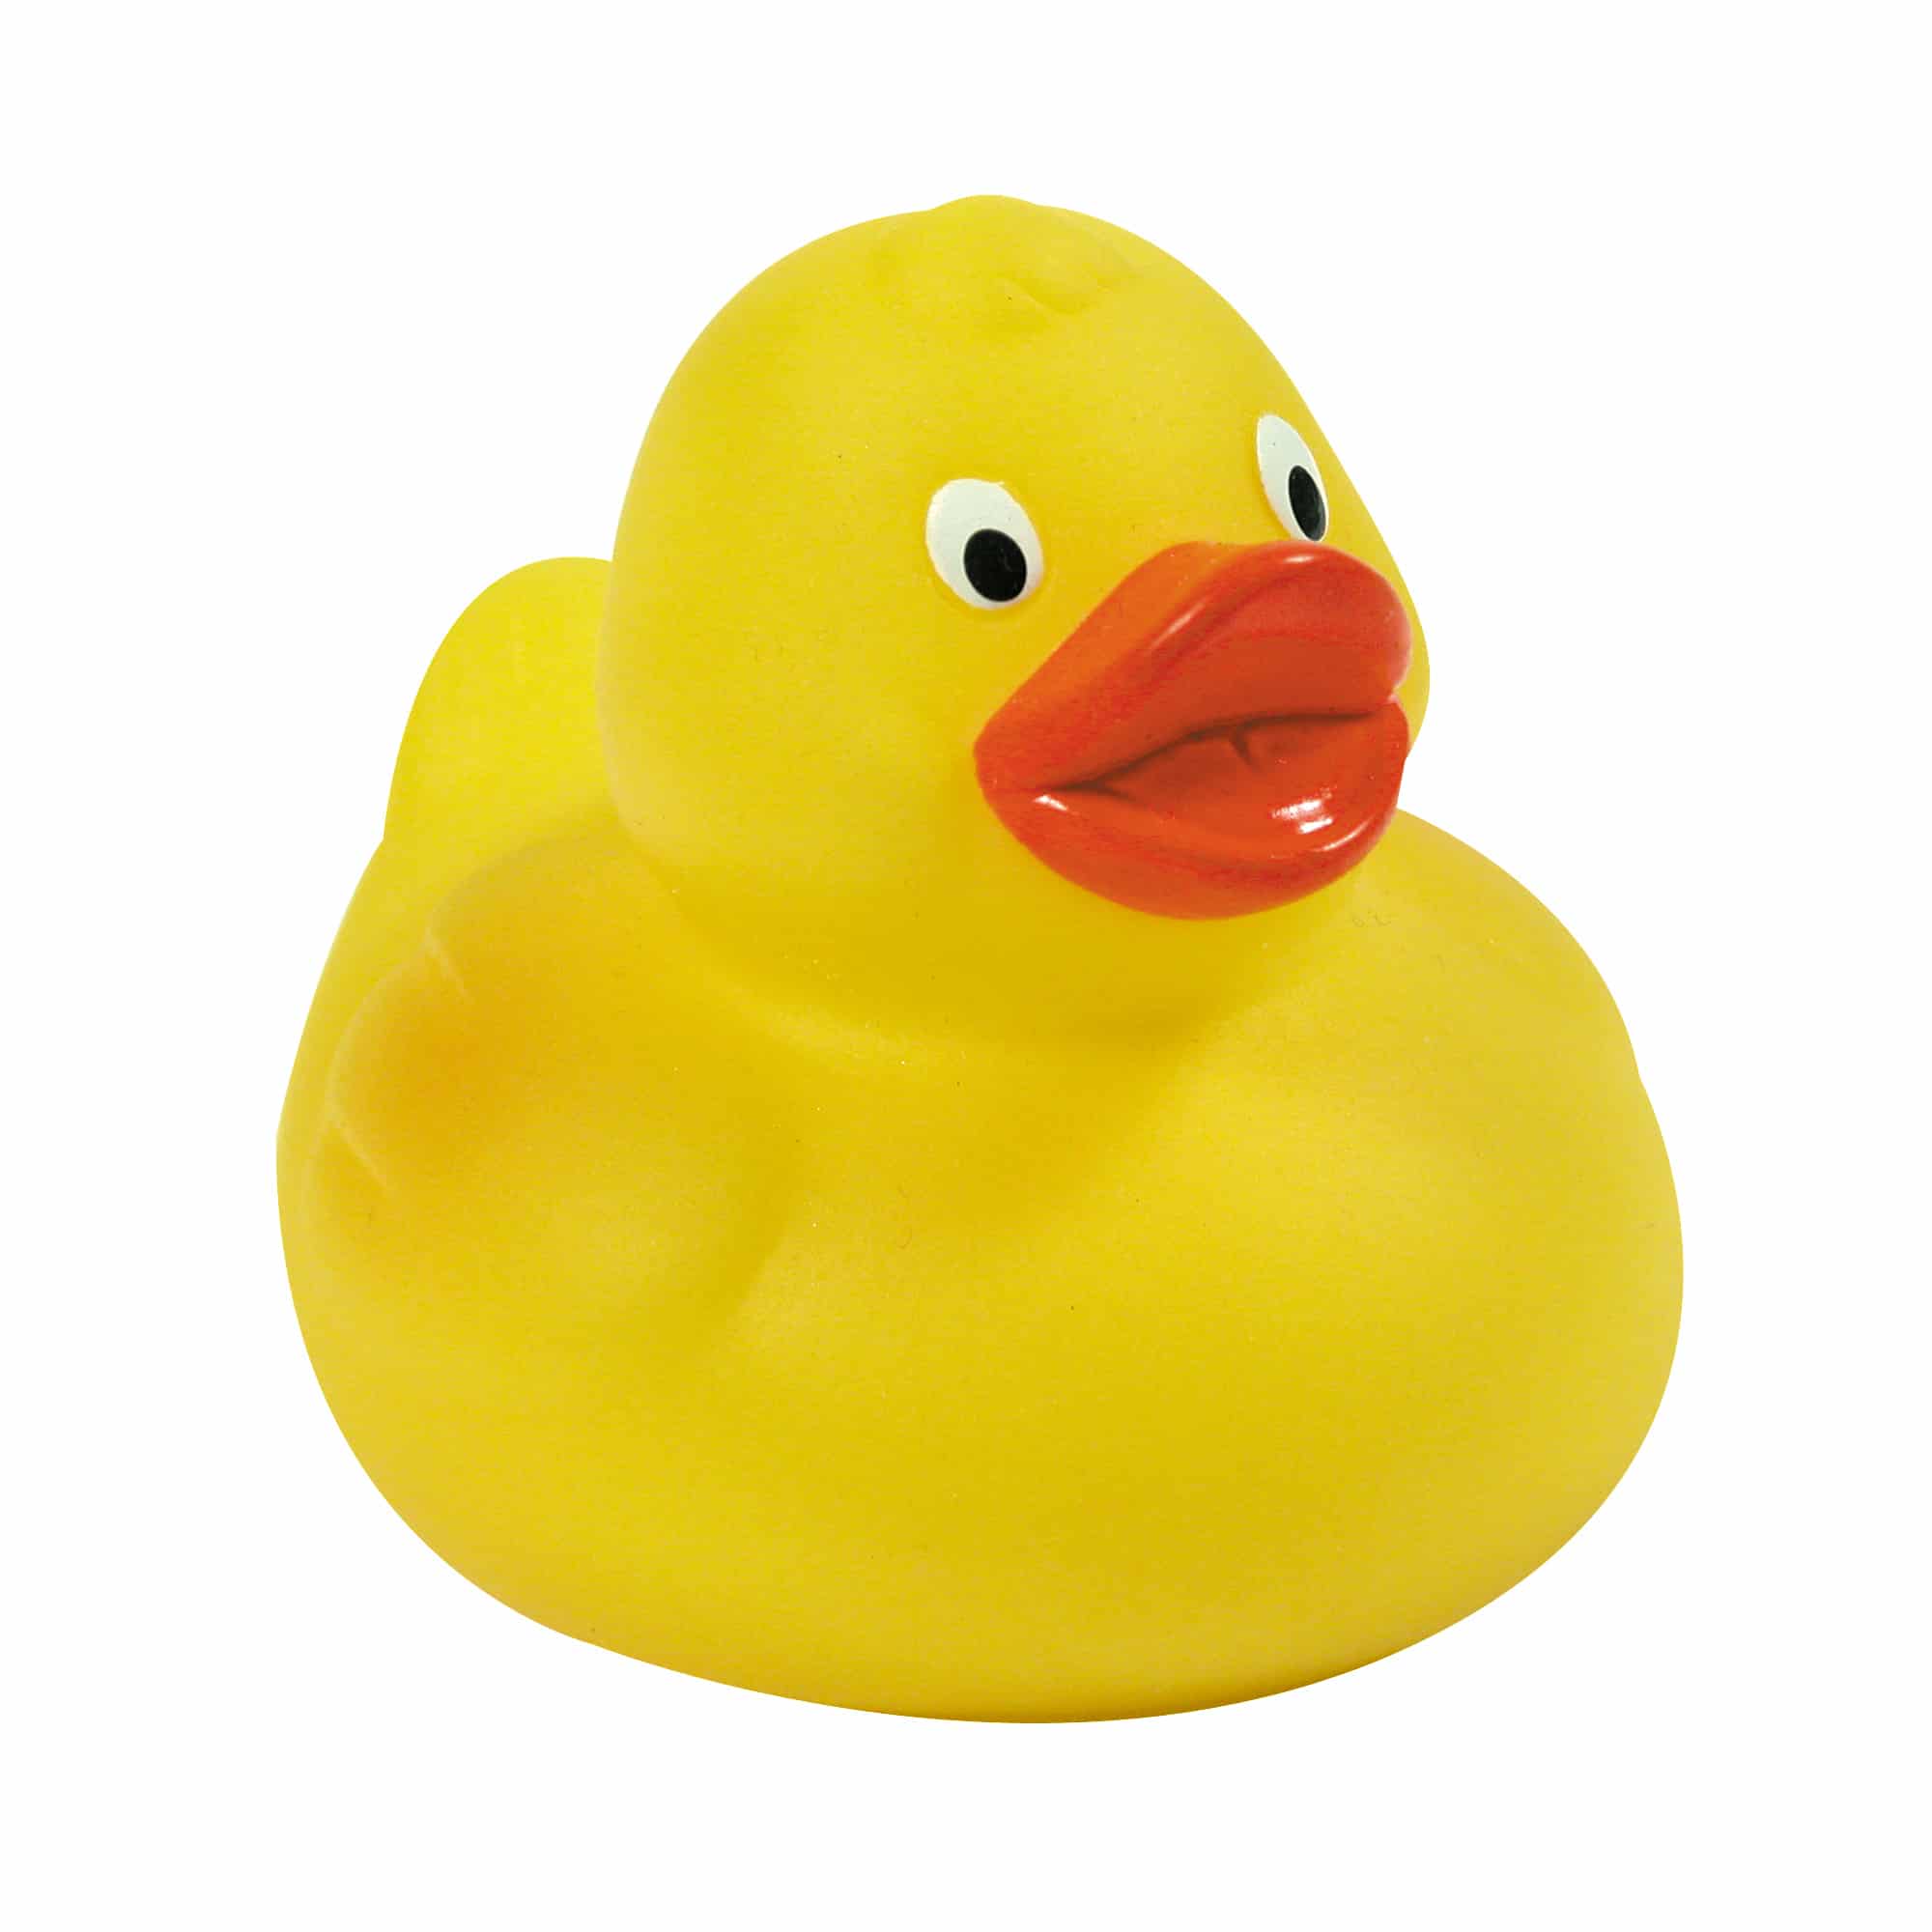 Albums 93+ Pictures Images Of Rubber Ducks Full HD, 2k, 4k